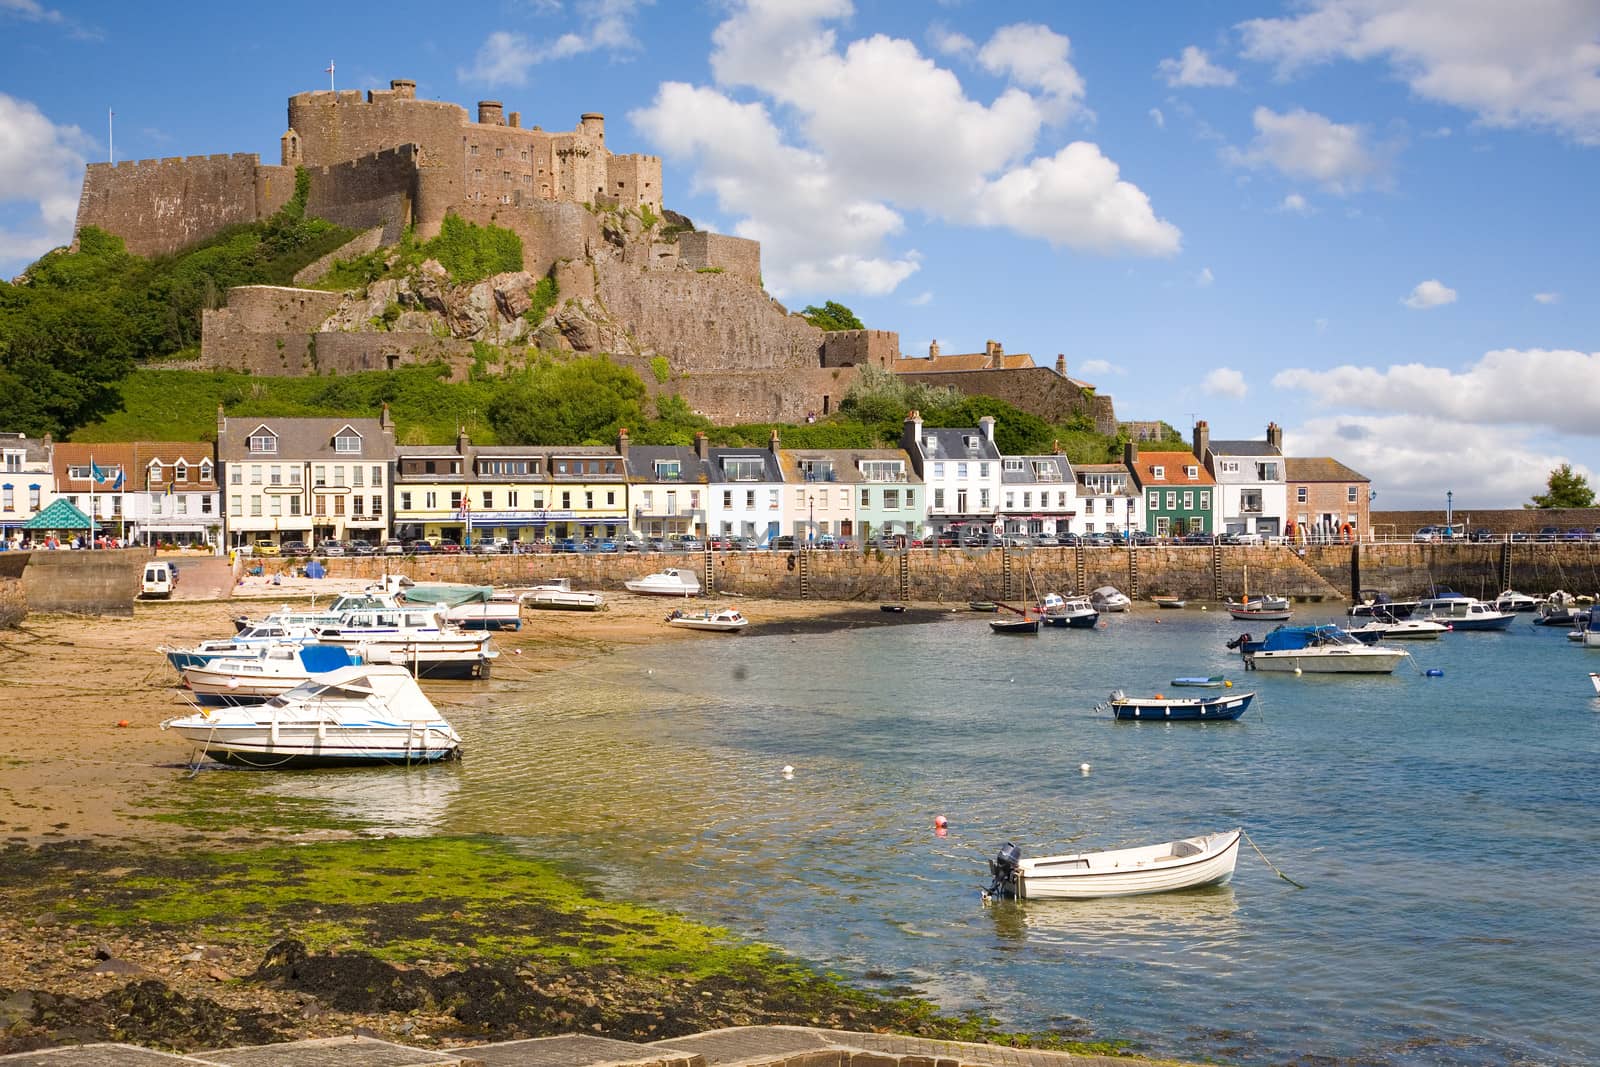 Gorey and Mont Orgueil Castle, Jersey, The Channel Islands